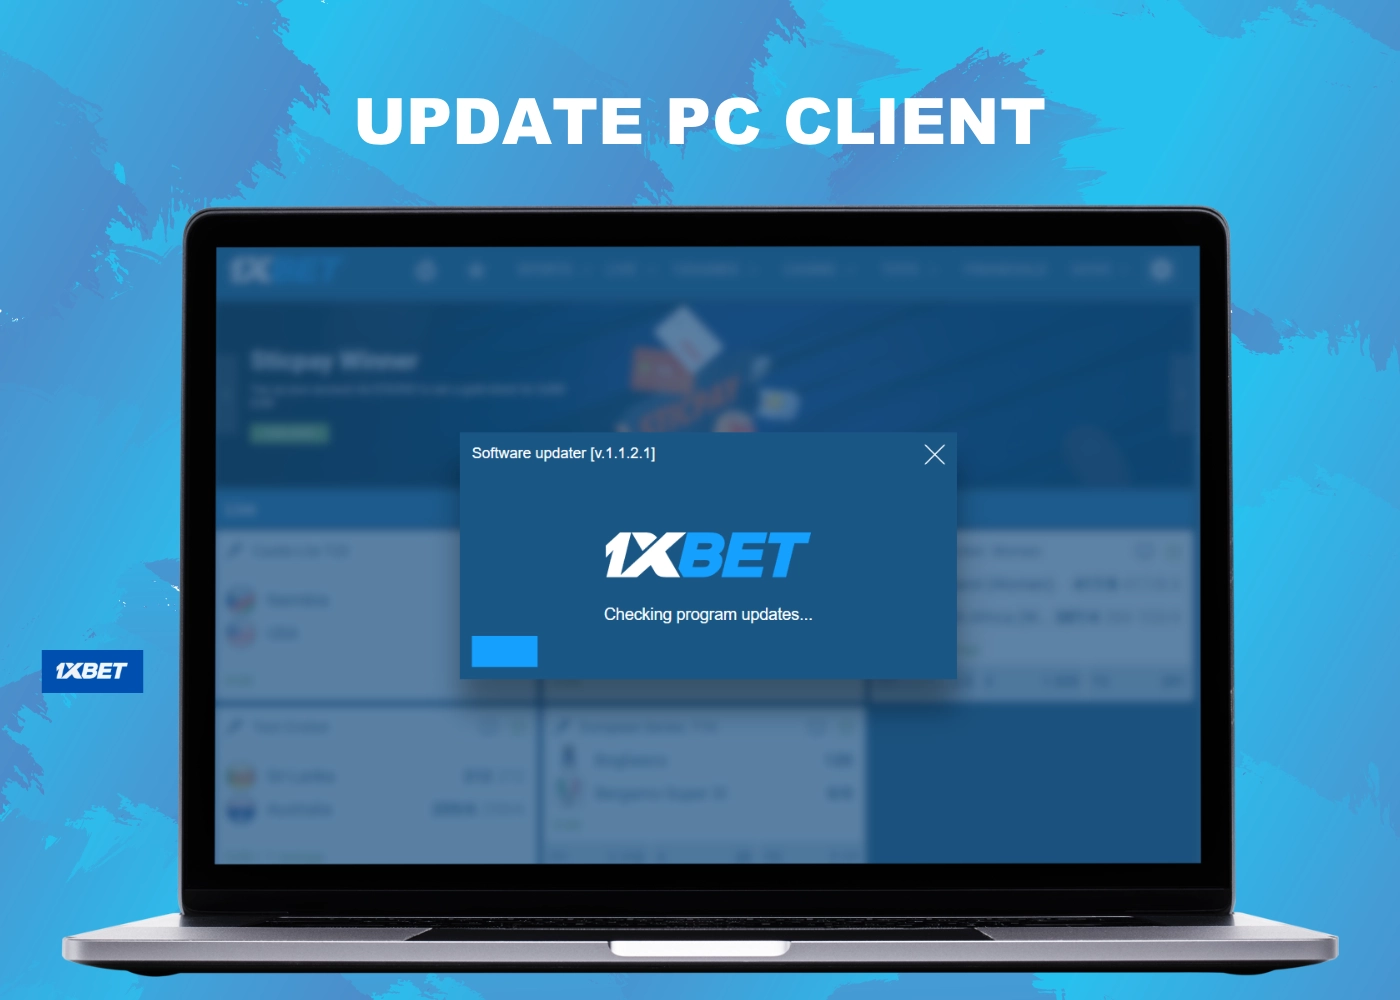 You will be able to update the 1xBet client PC when the appropriate notification appears after opening the program